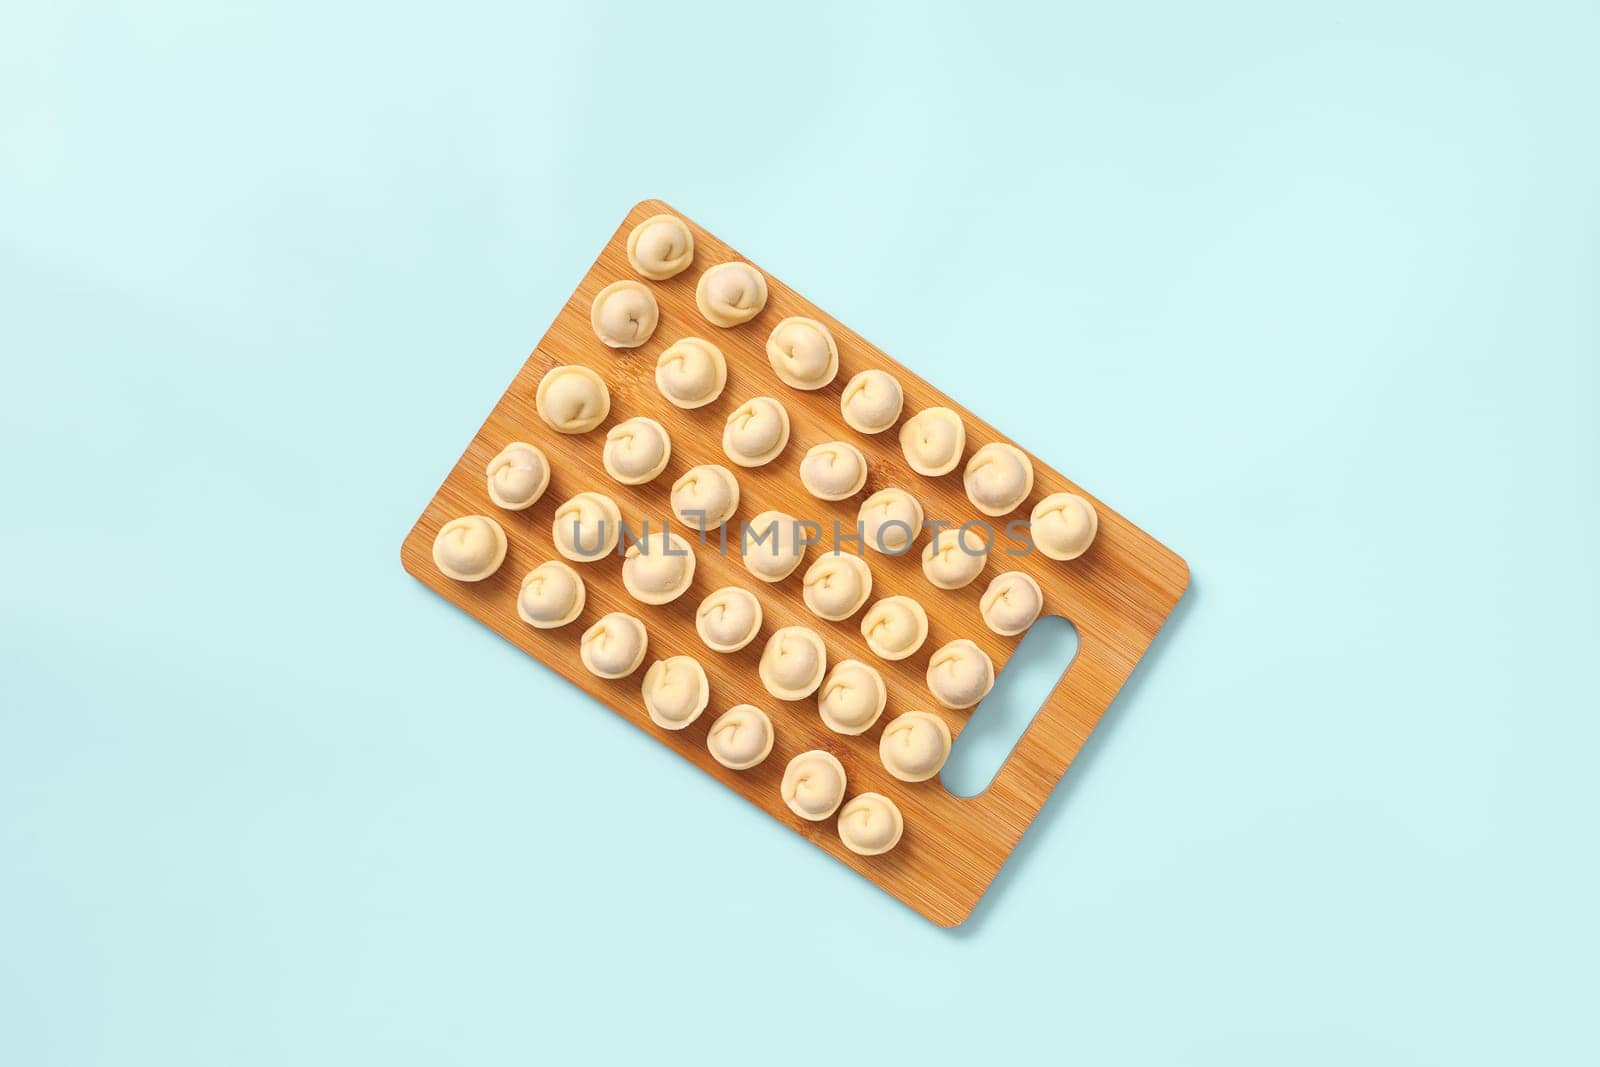 Top view of a wooden board with neatly laid out semi-cooked dumplings on blue background.